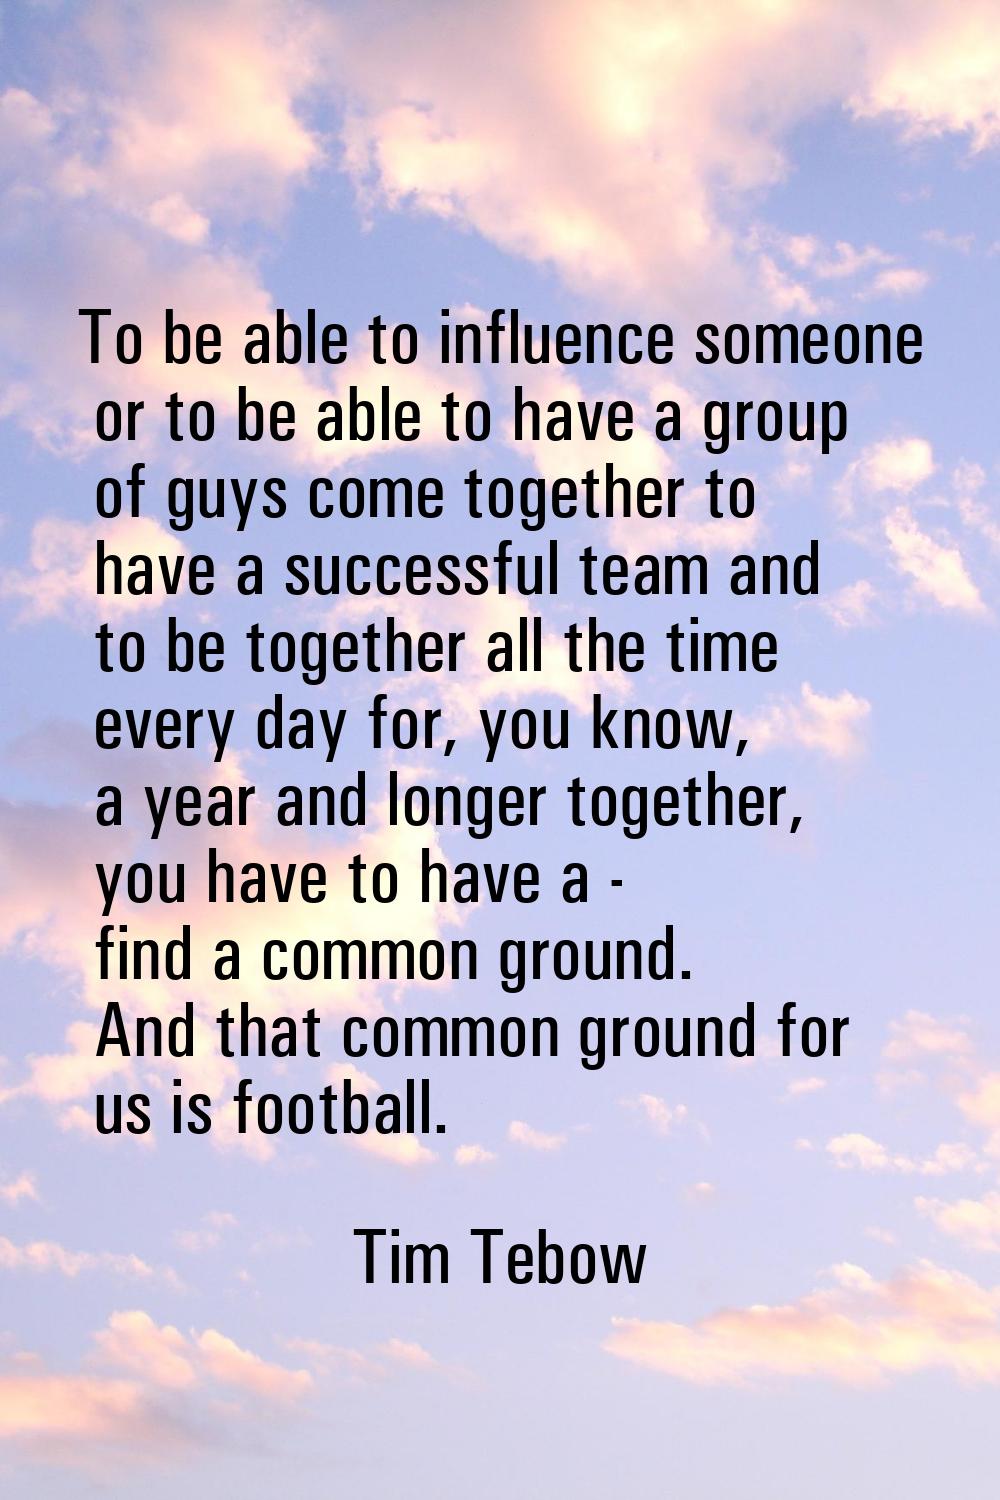 To be able to influence someone or to be able to have a group of guys come together to have a succe